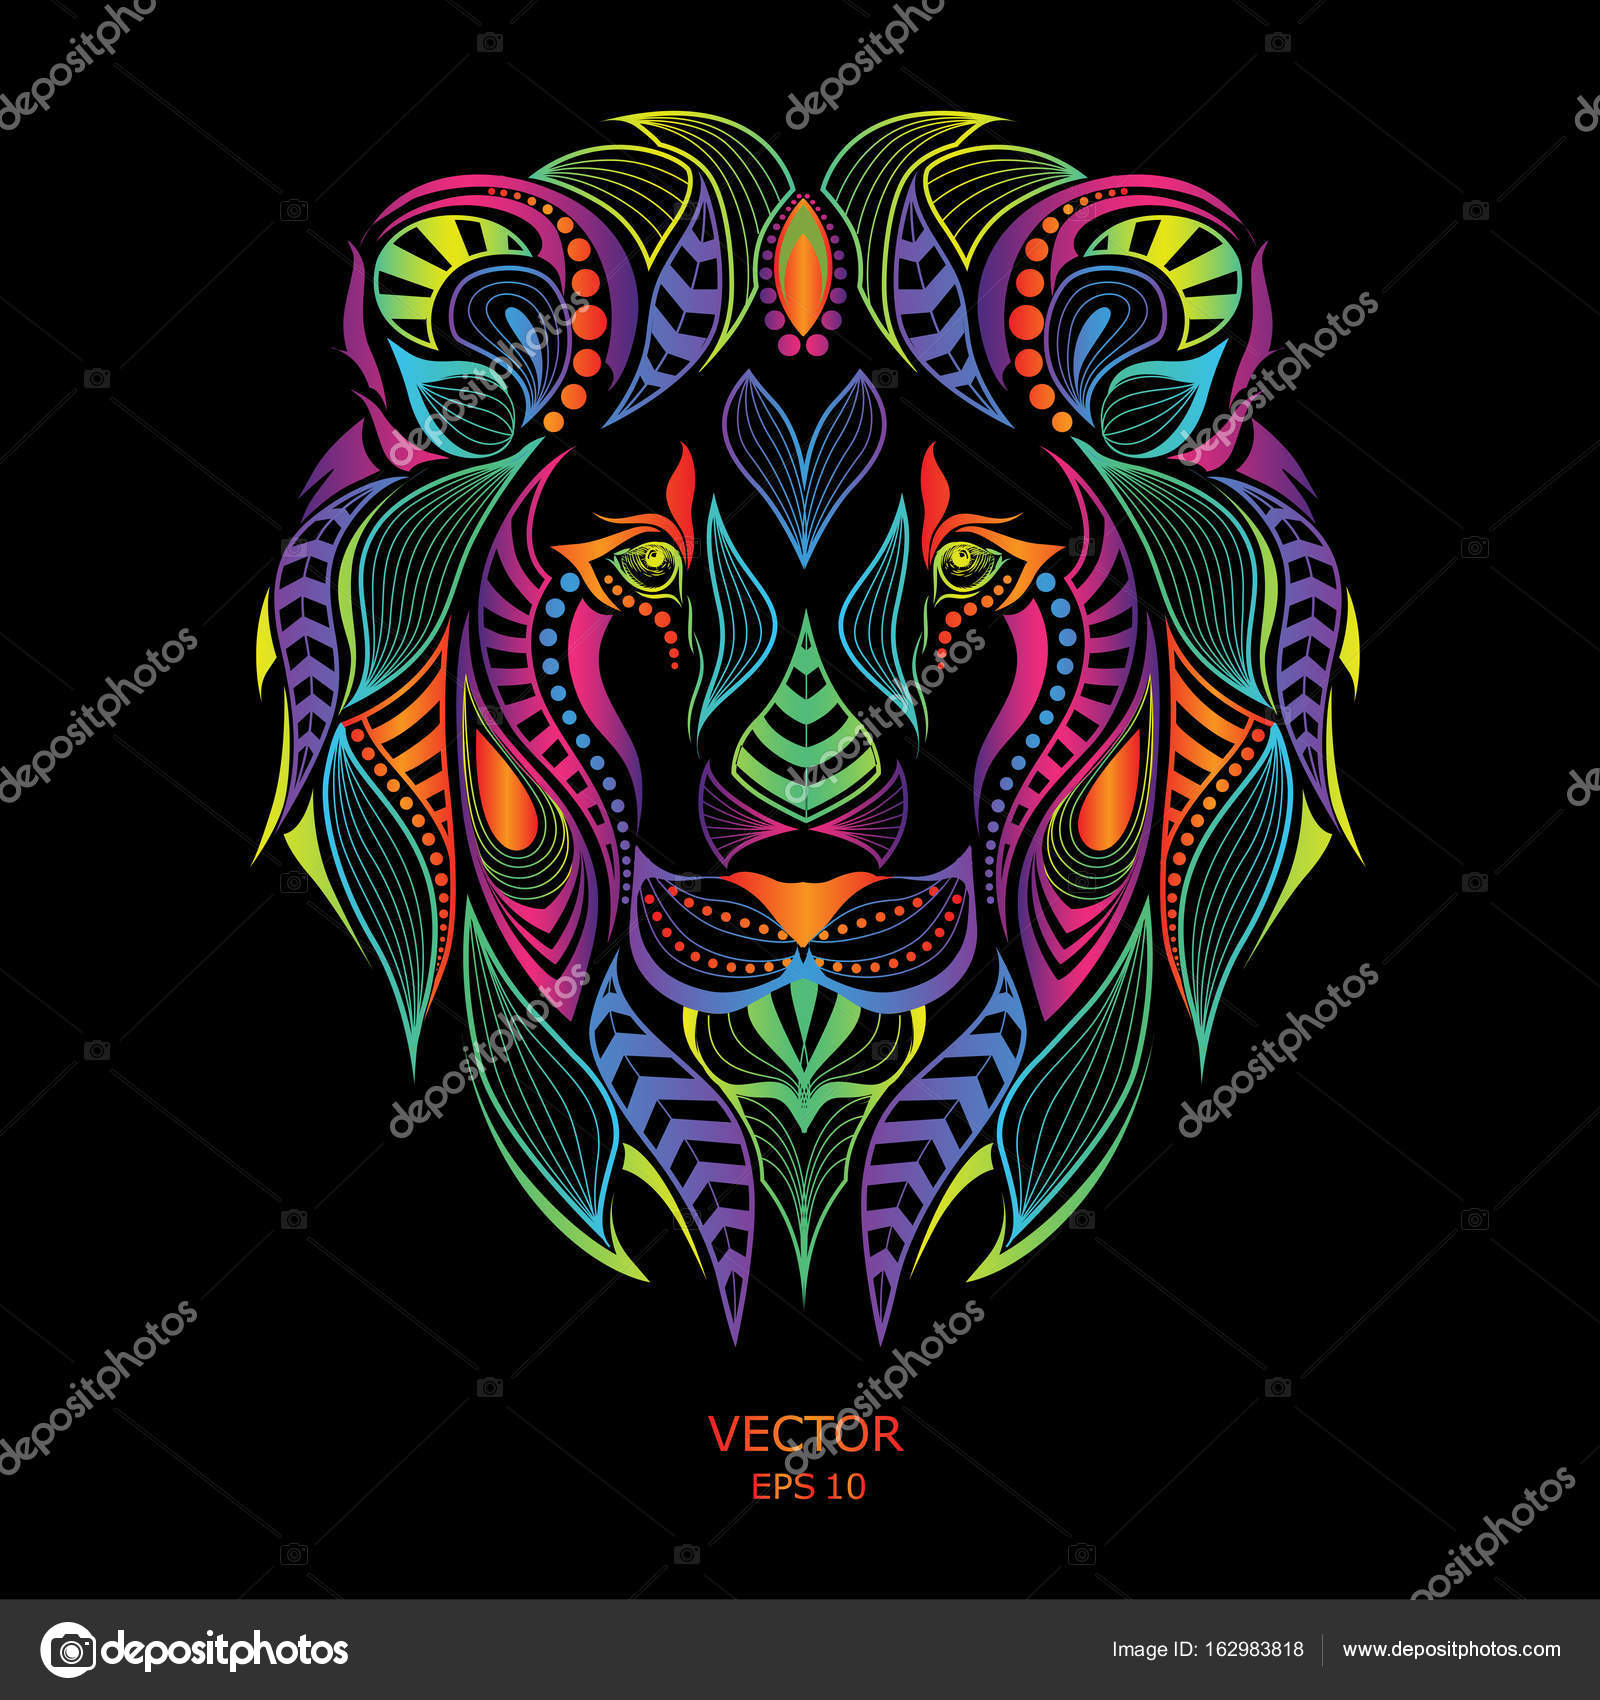 depositphotos_162983818-stock-illustration-patterned-colored-head-of-the